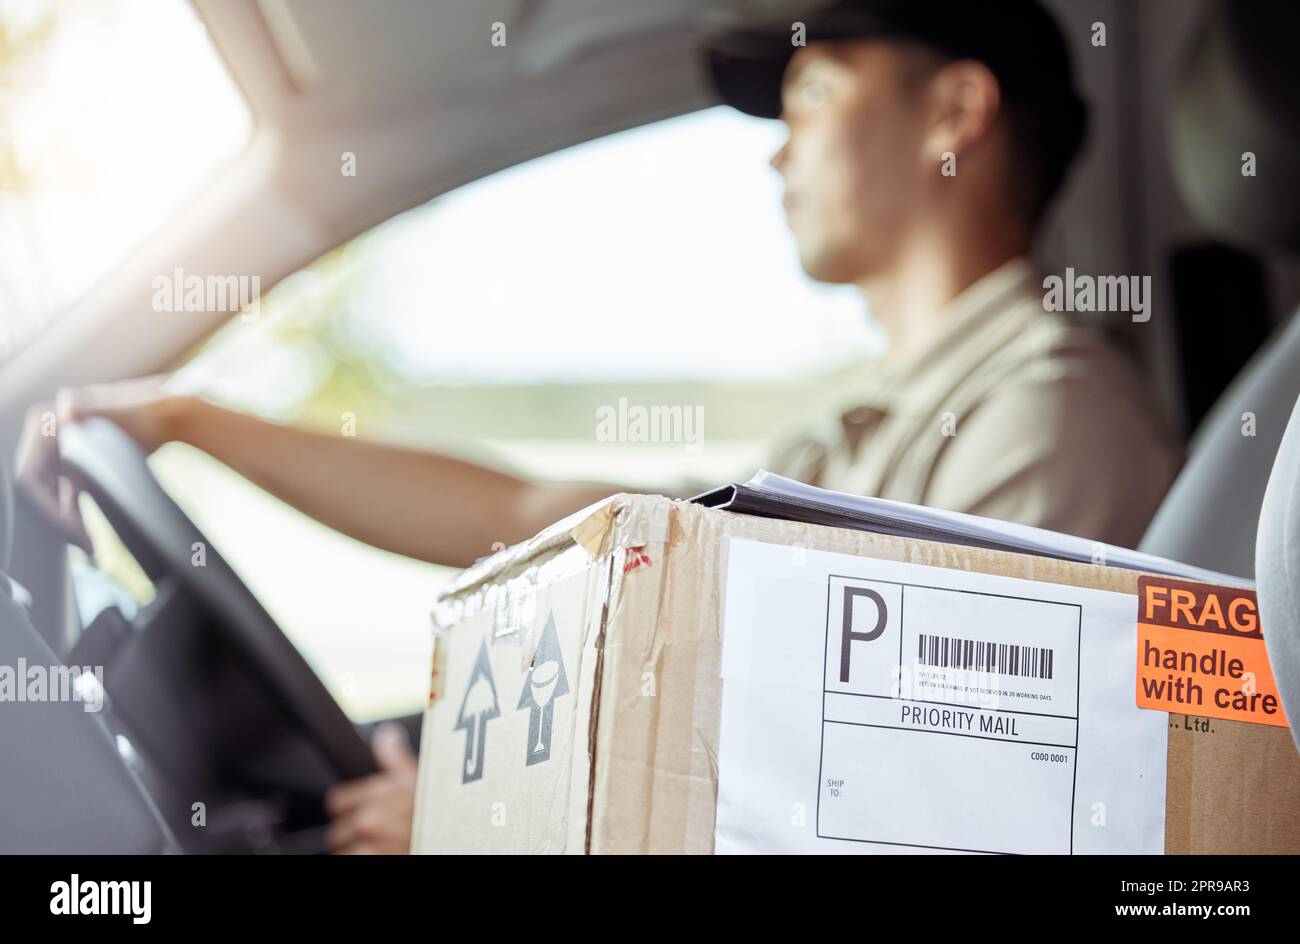 Keeping your packages safe. a delivery man driving to drop off a package. Stock Photo